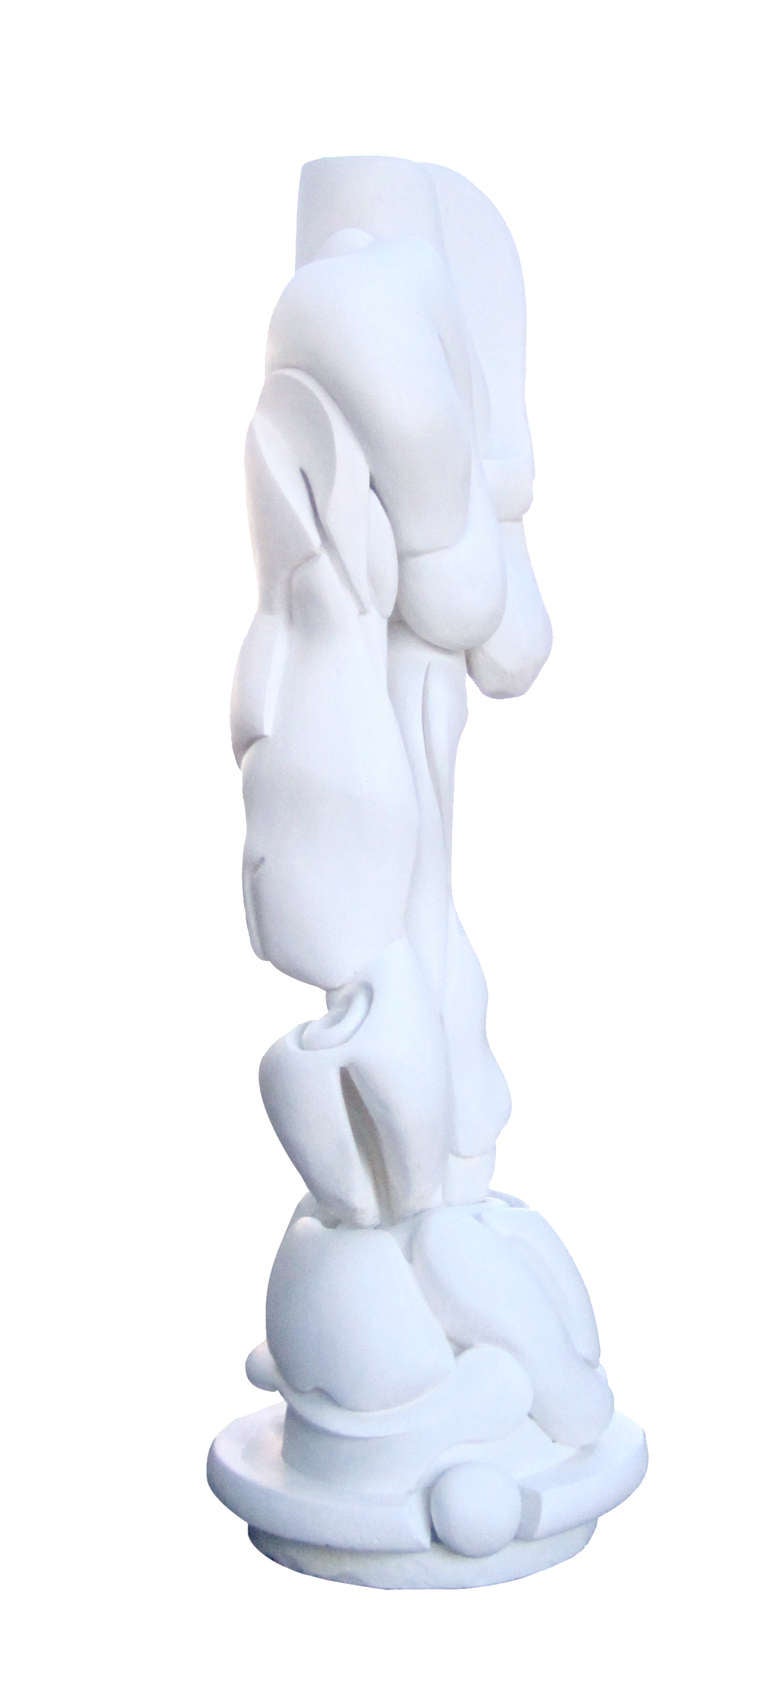 This white plaster sculpture seems to be a compilation of various figural elements merged and arranged in a contemplative, surrealist fashion. The smoothness of the material coupled with the shapes present suggests human forms in an abstract context.